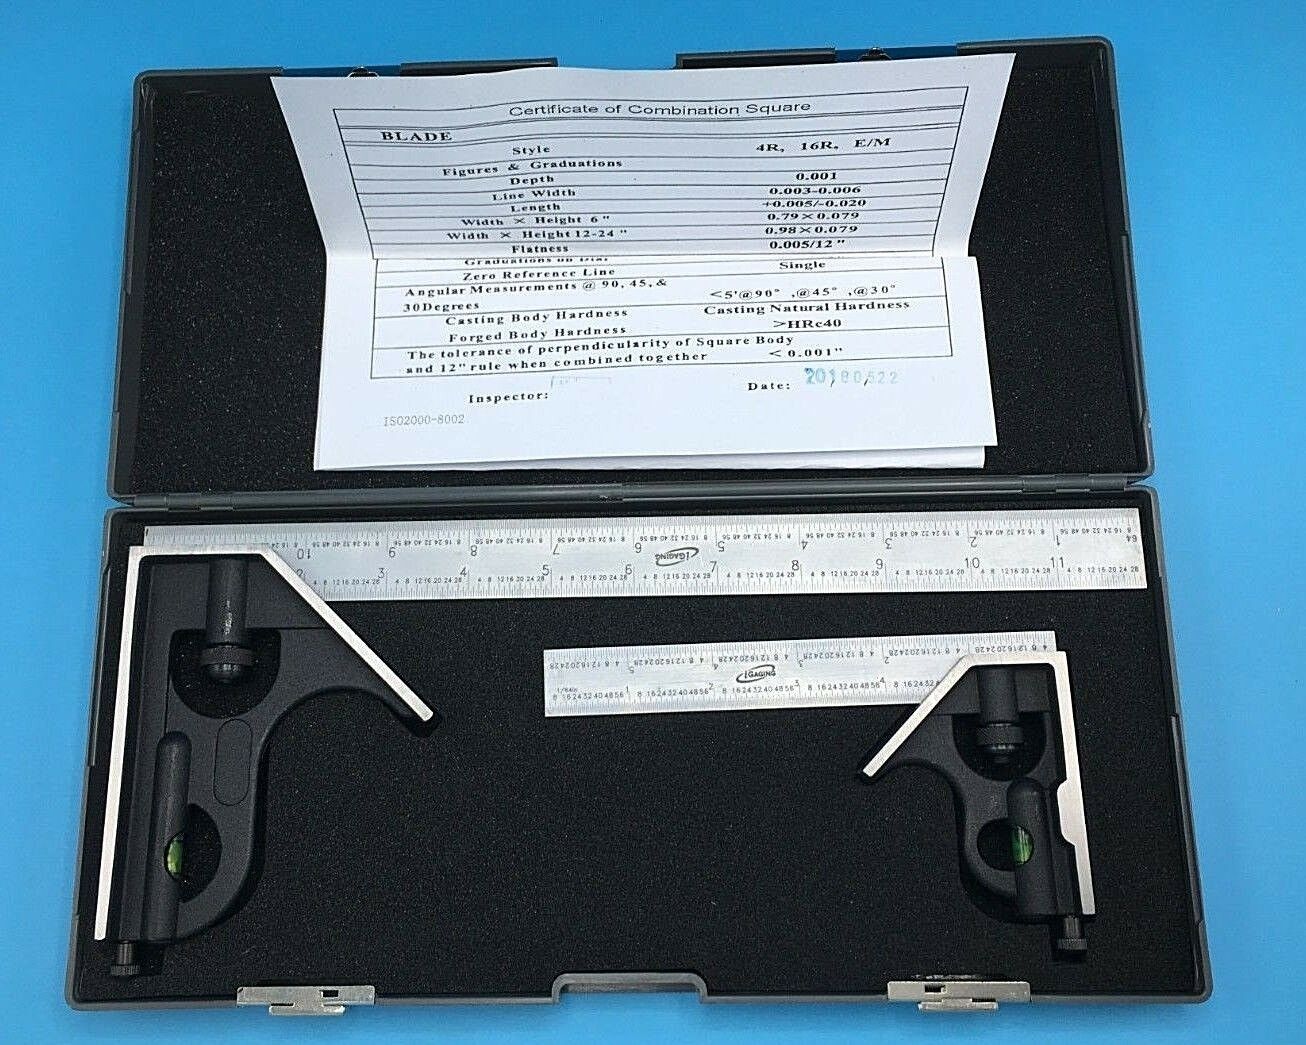 iGAGING 34-212-26 6" AND 12" Combination Square Boxed Set